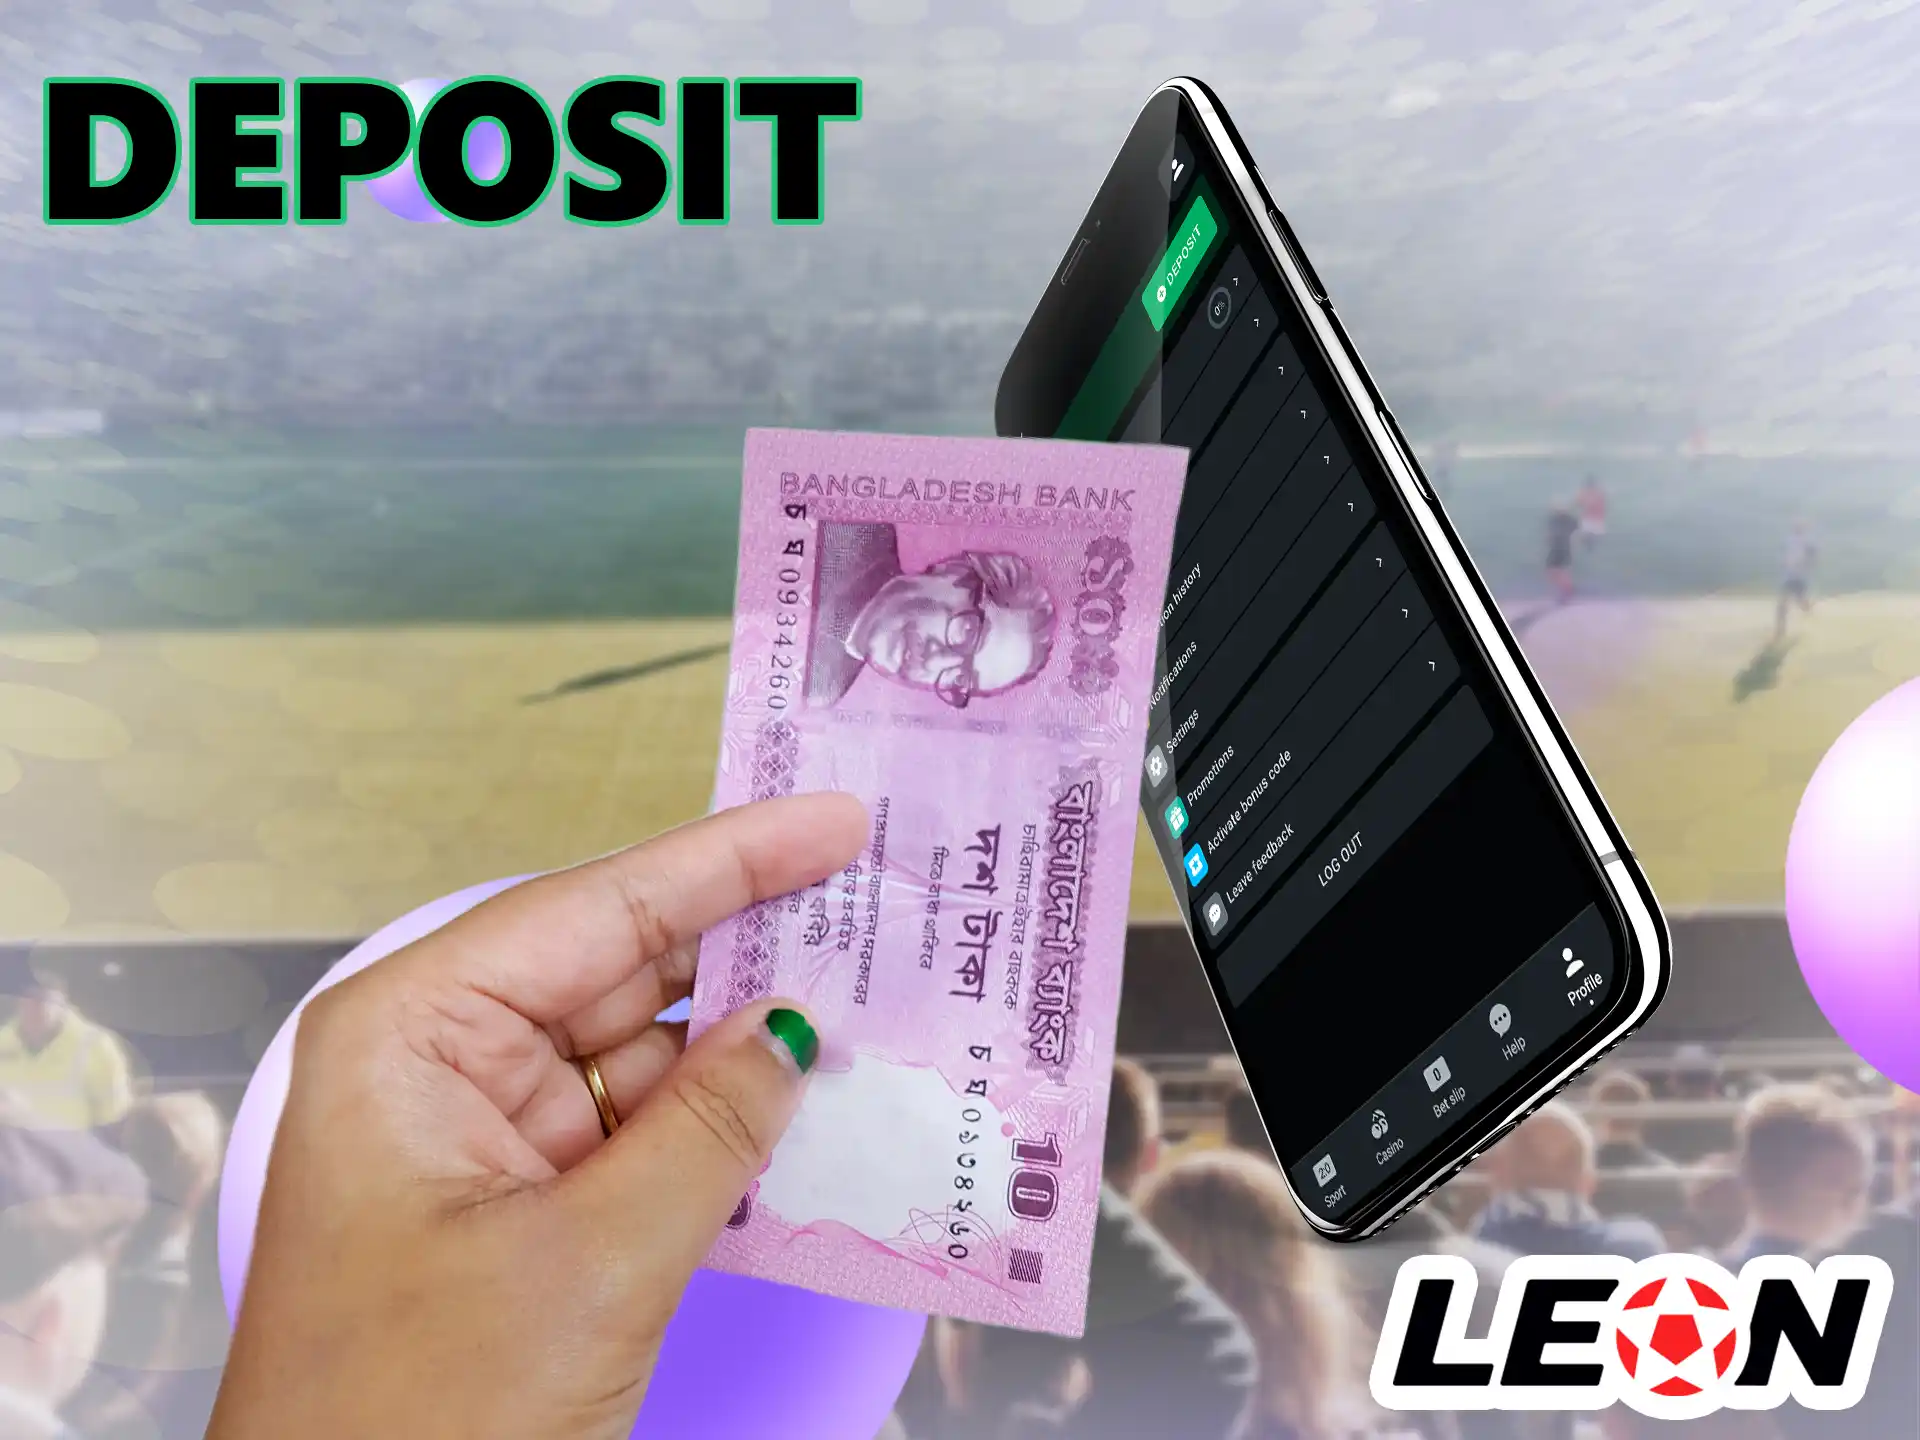 Players should understand that in order to start playing, you need to deposit money into a virtual Leon Bet account, our guide will help you do this.